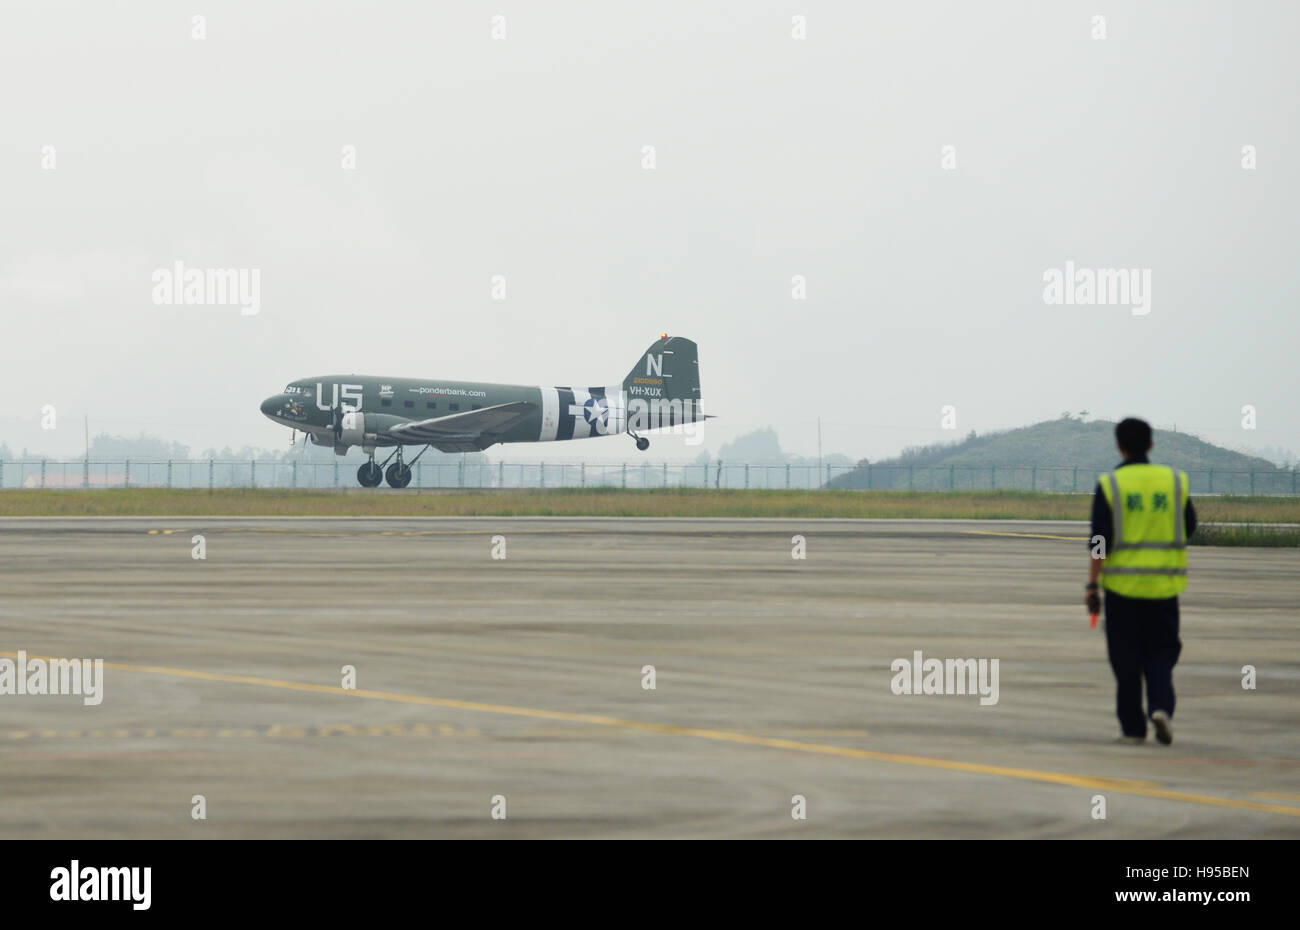 Guilin, China. 19th Nov, 2016. A C-47 aircraft, contributed by the Flying Tiger Historical Organization in the United States, lands at the Liangjiang airport in Guilin, south China's Guangxi Zhuang Autonomous Region, Nov. 19, 2016. The plane used in the Australian battleground during World War II reached south China's Guilin, after it repeated a flight of the dangerous 'hump route' over the Himalayas, a route flown by the famous U.S. Flying Tigers. It will be permanently displayed at the Flying Tigers Heritage Park in Guilin. Credit:  Xinhua/Alamy Live News Stock Photo